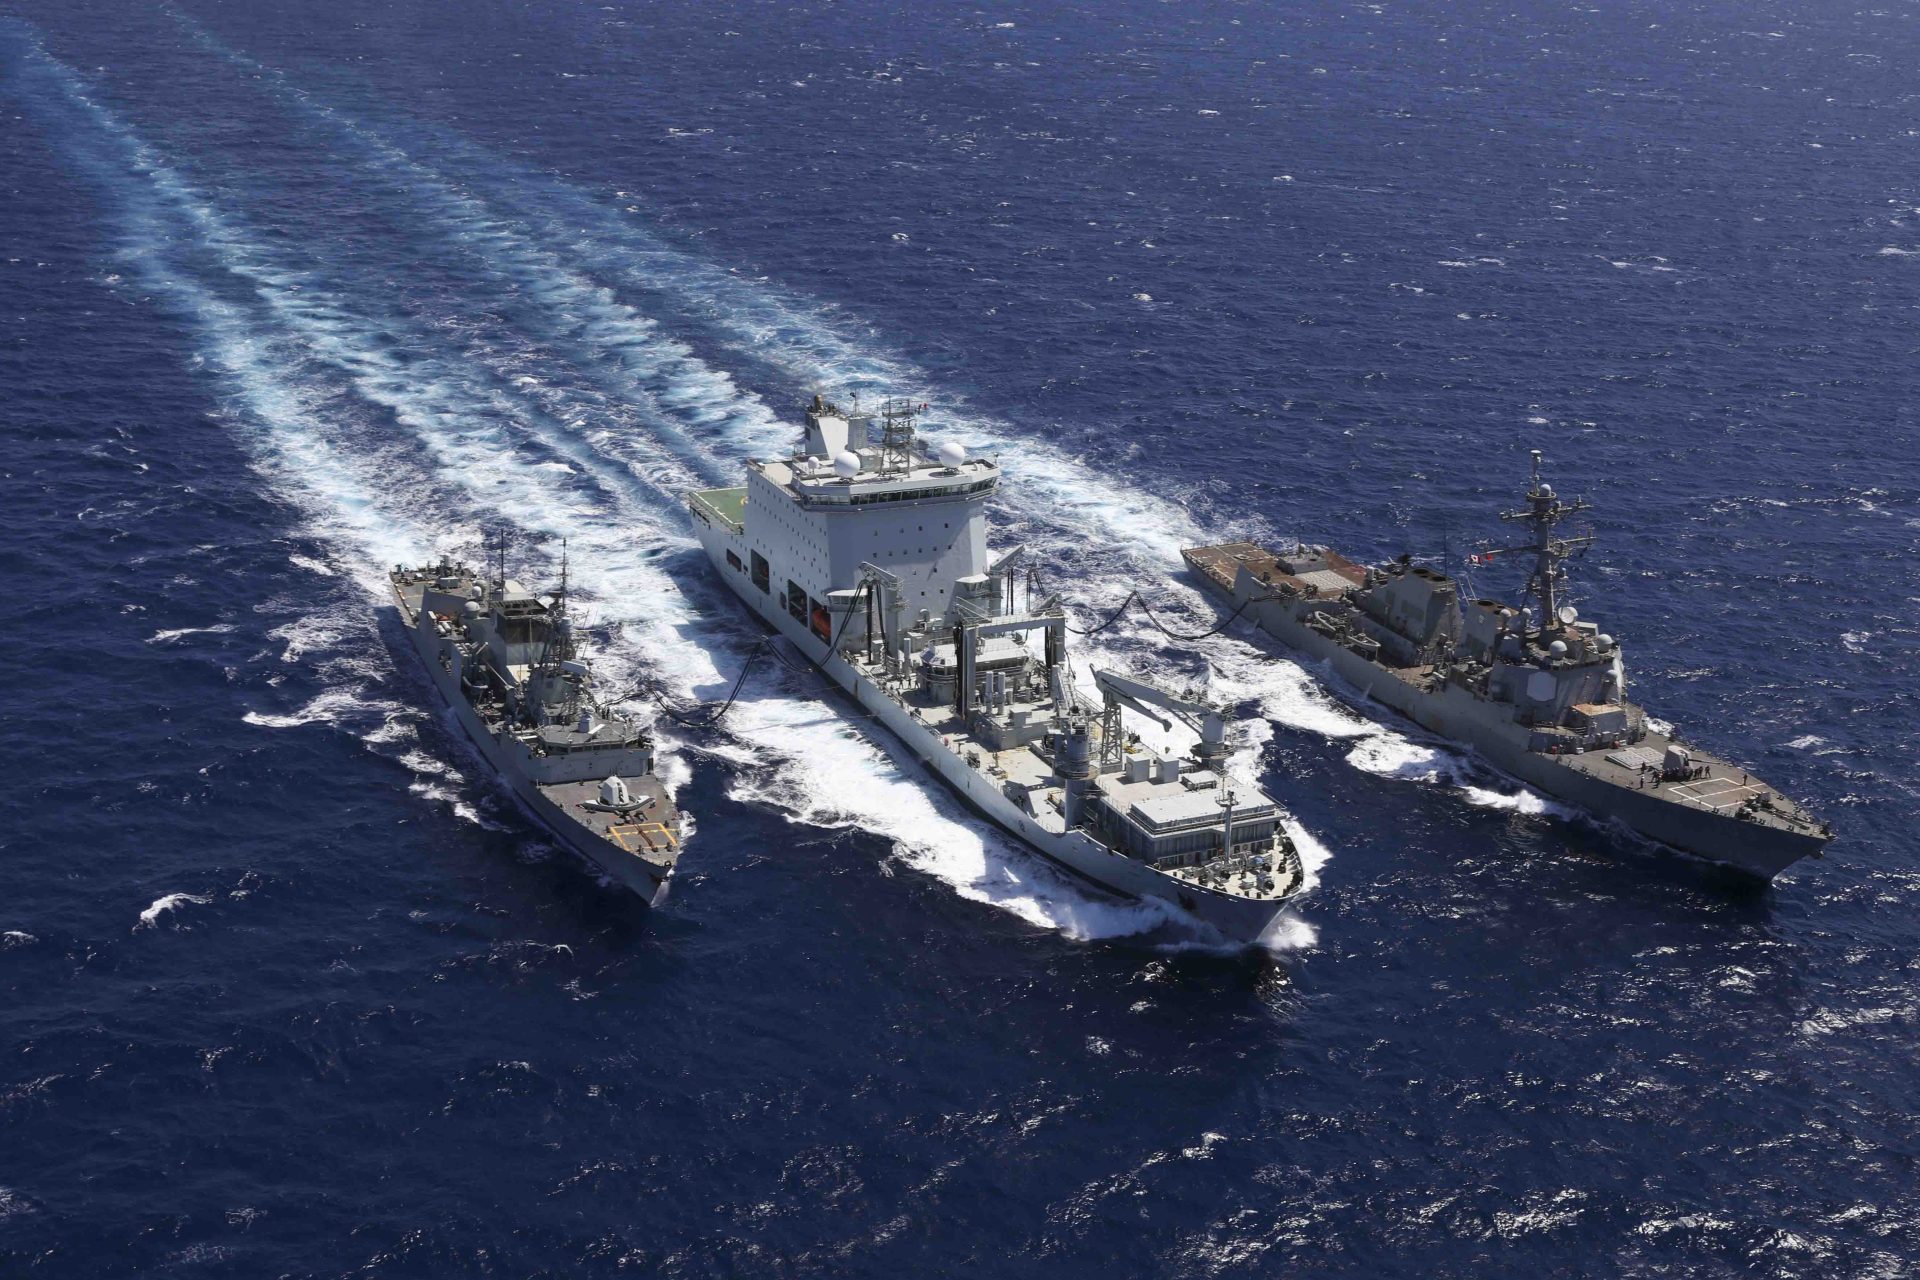 Combat Support Ship Asterix (centre) resupplies US destroyer USS Truxtun and Canadian frigate HMCS Montreal during evacuation efforts offshore Sudan during May 2023. (US Department of Defense)